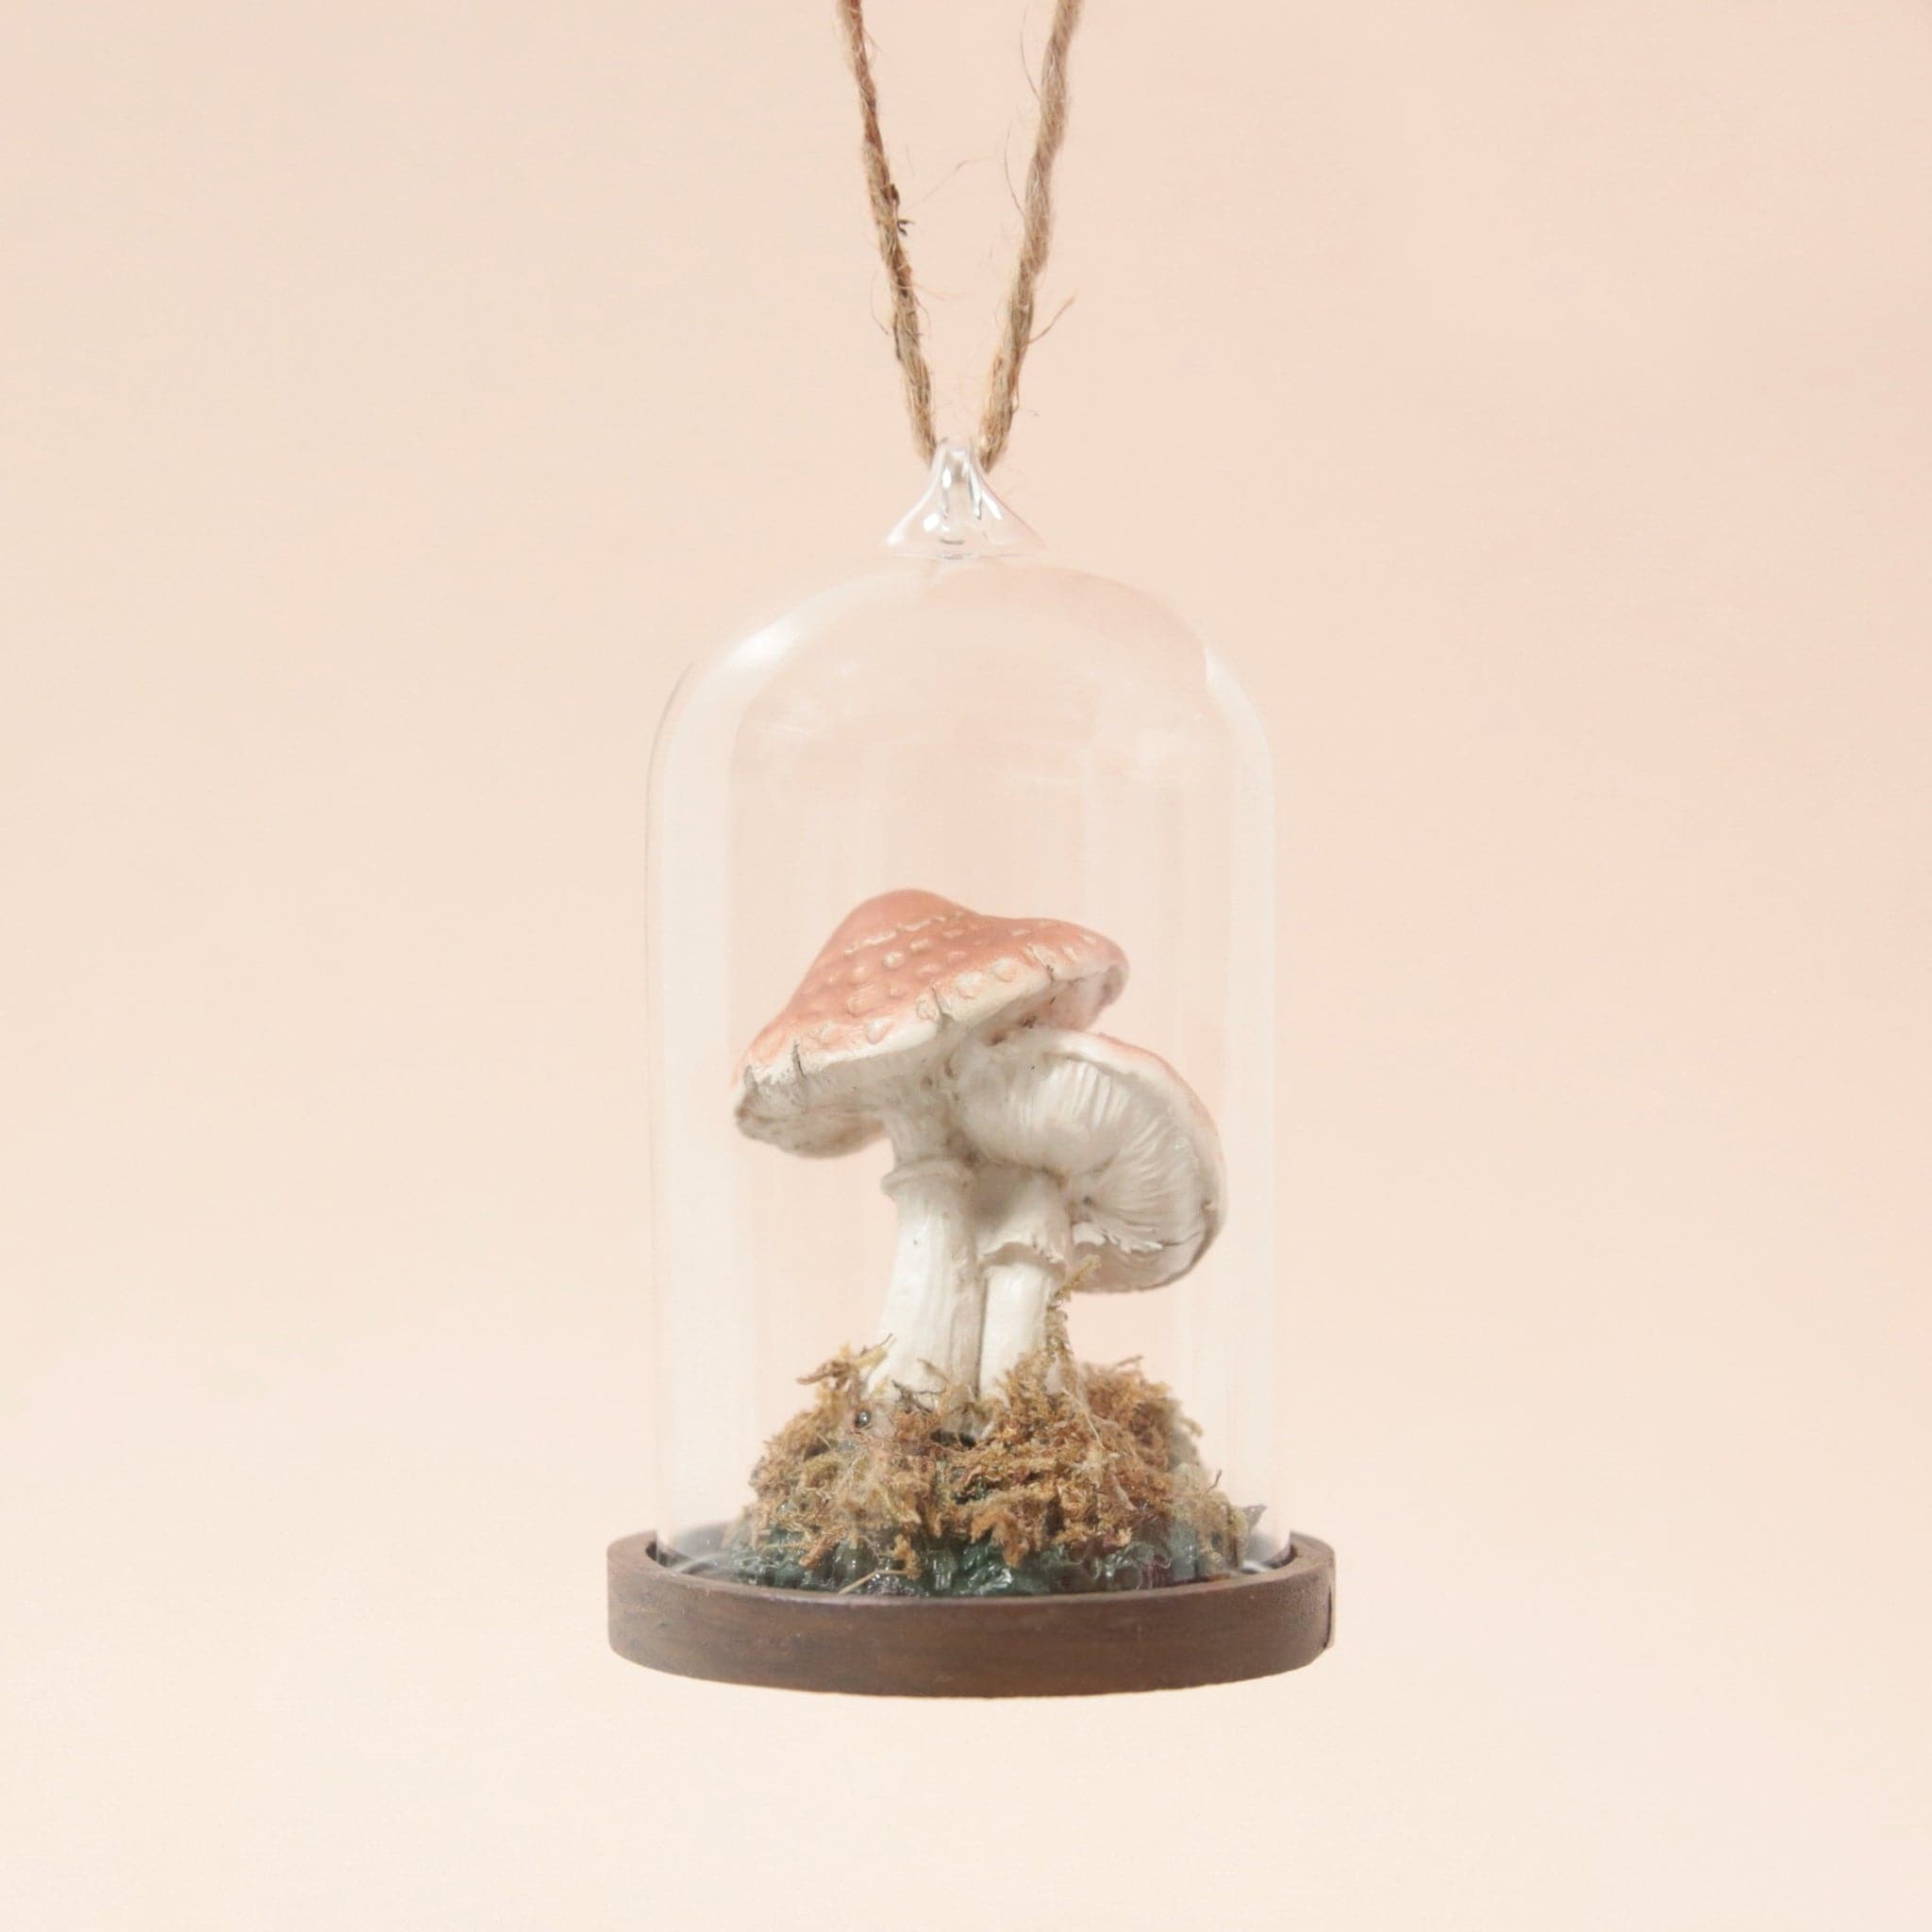 This mushroom ornament features two mushrooms of different sizes with a tan colored top, placed in a glass dome cloche with a wooden base and moss covering the bottom.